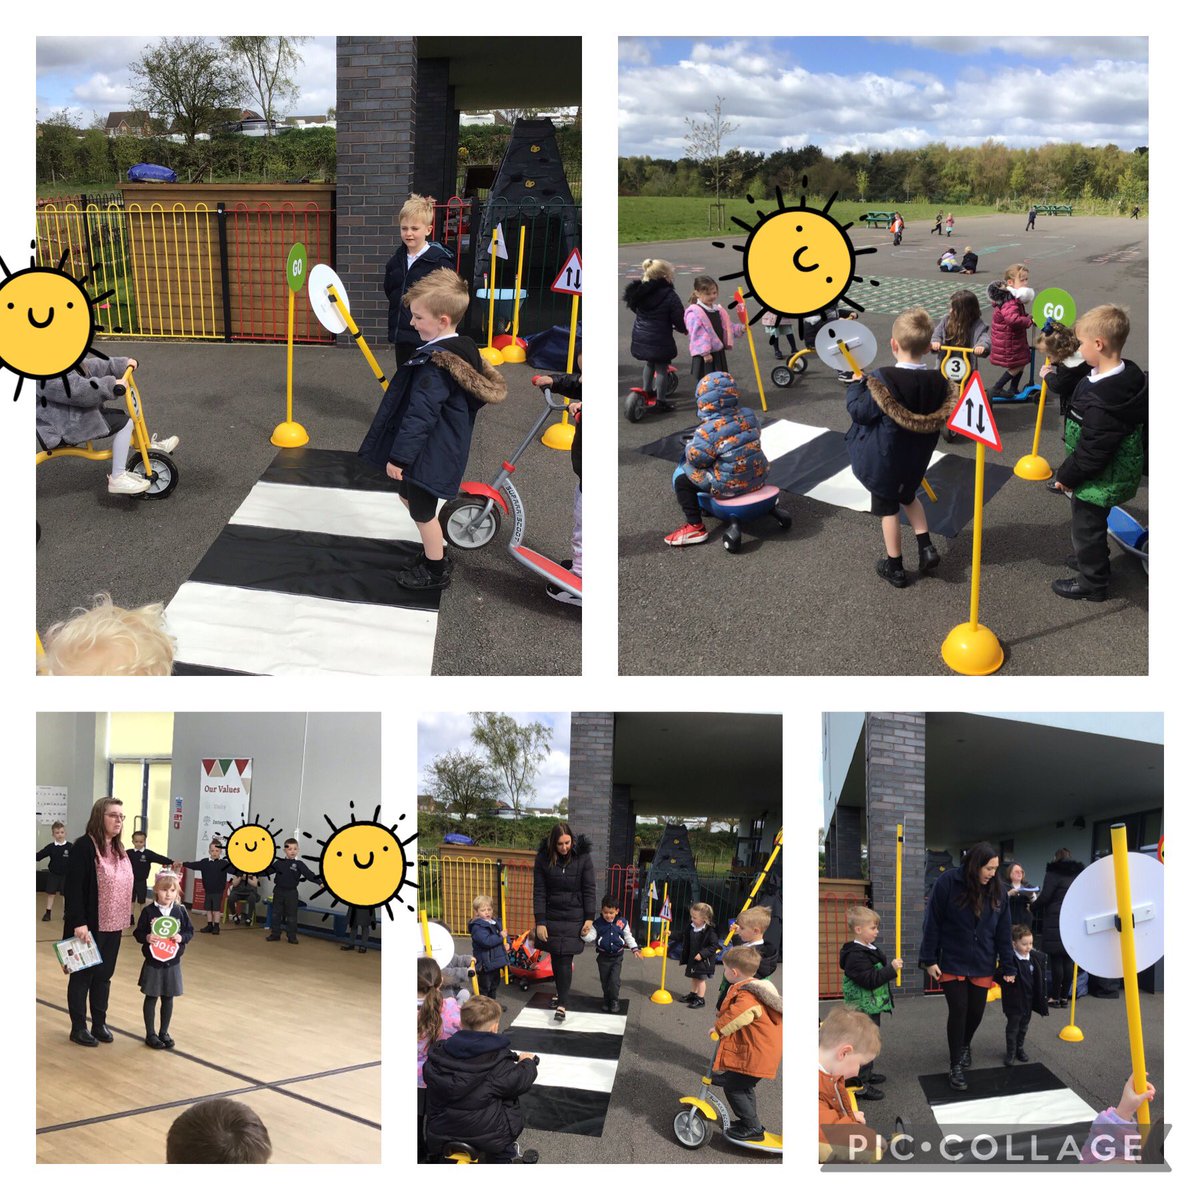 Today is ‘Beep, Beep day’. Nursery and Reception have had a lovely morning learning and talking about road safety. @PoppyfieldSch @MrsBytheway